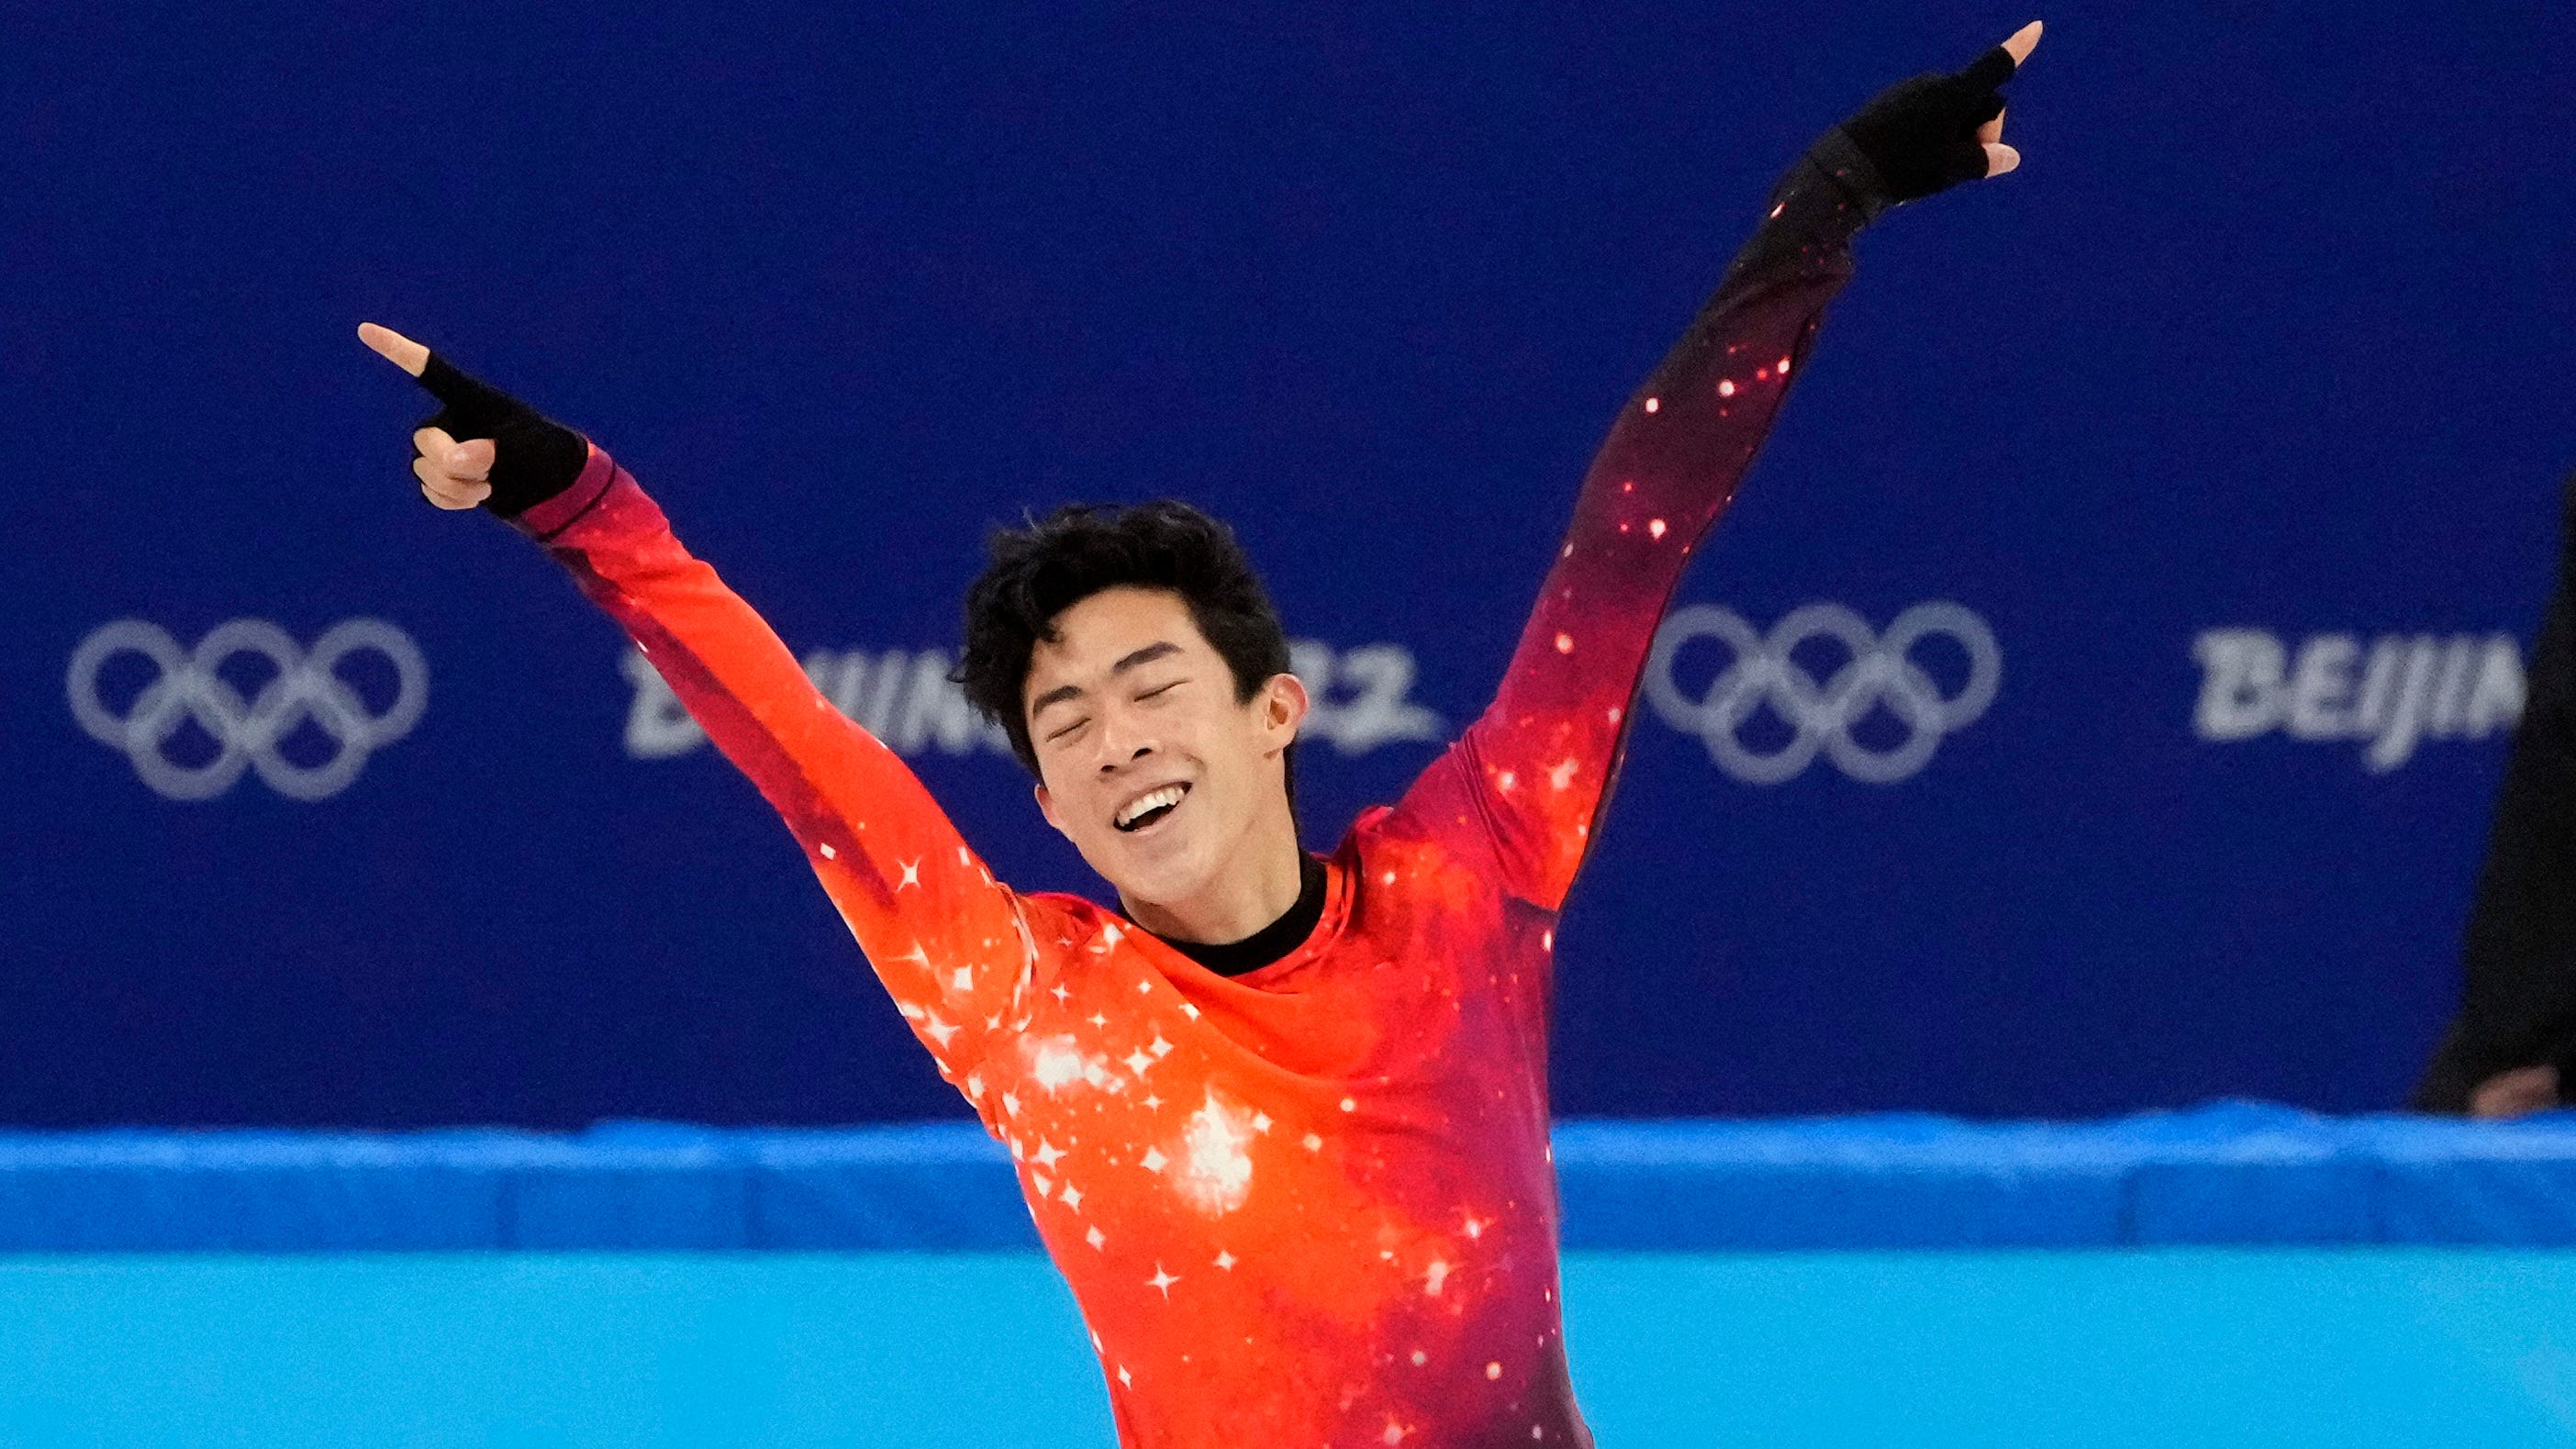 Nathan Chen completes his routine en route to the gold medal in the men's singles figure skating competition.